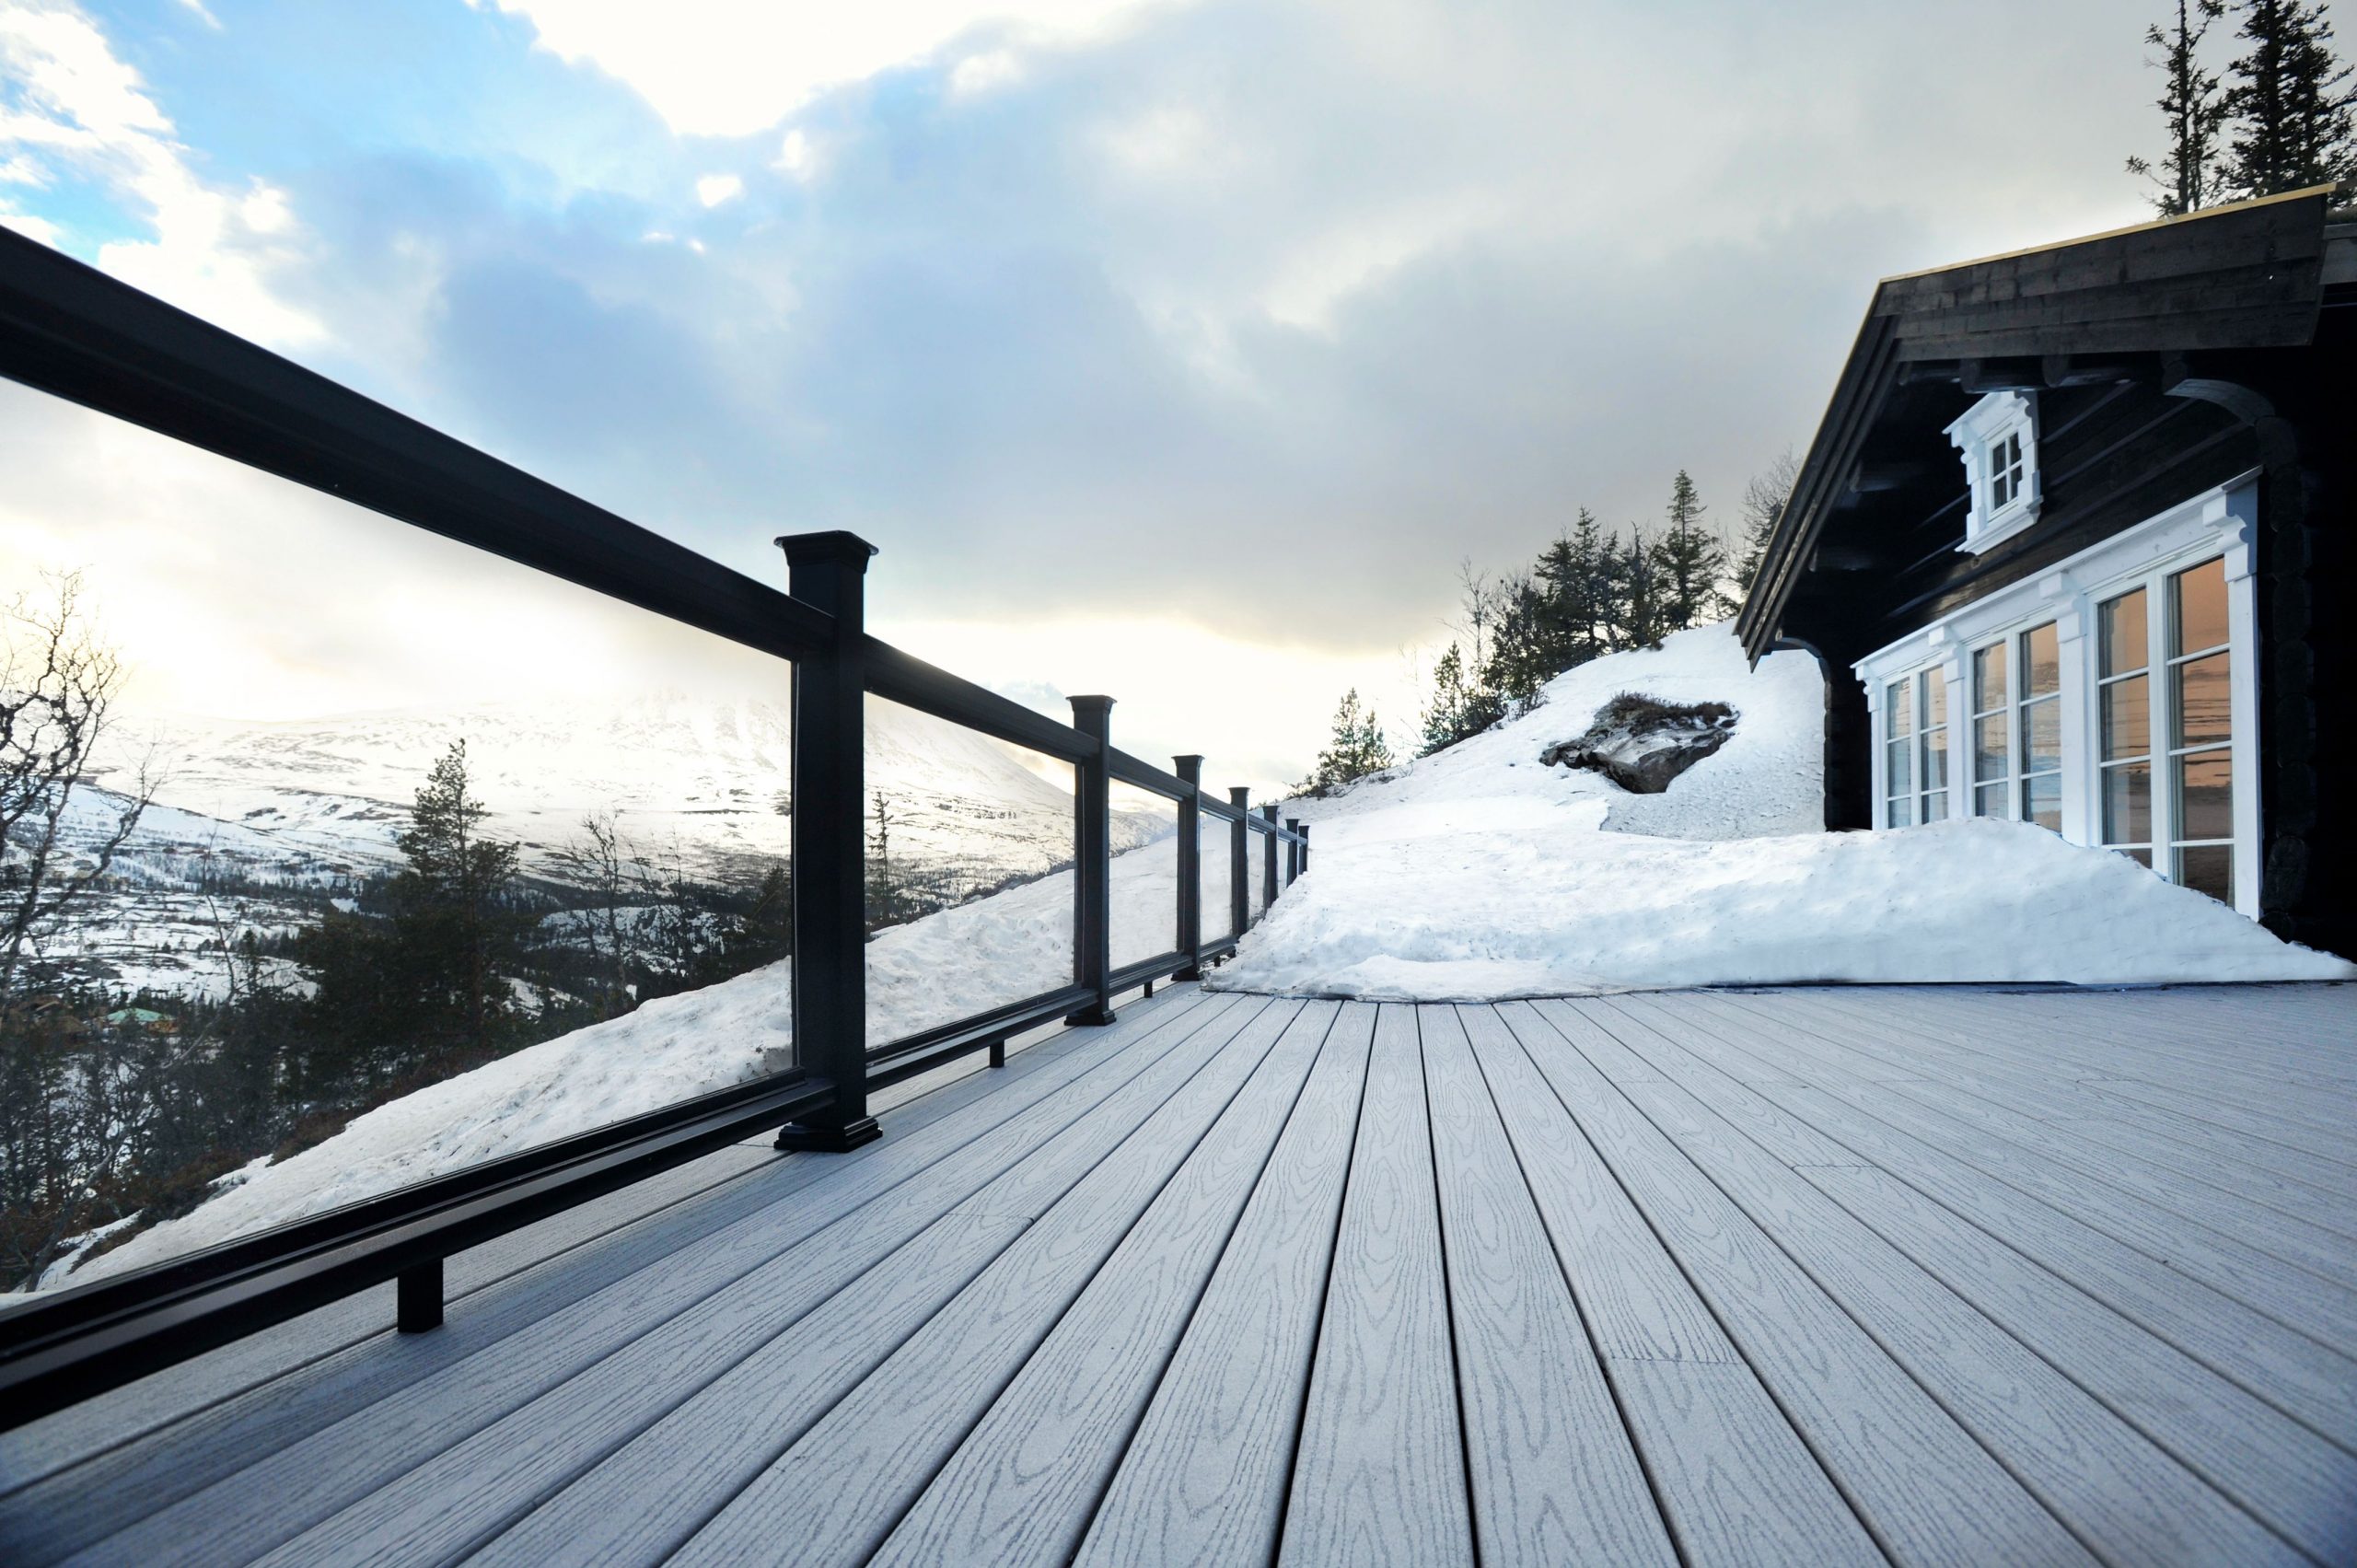 Professional Tips for Enjoying Your Deck in Winter